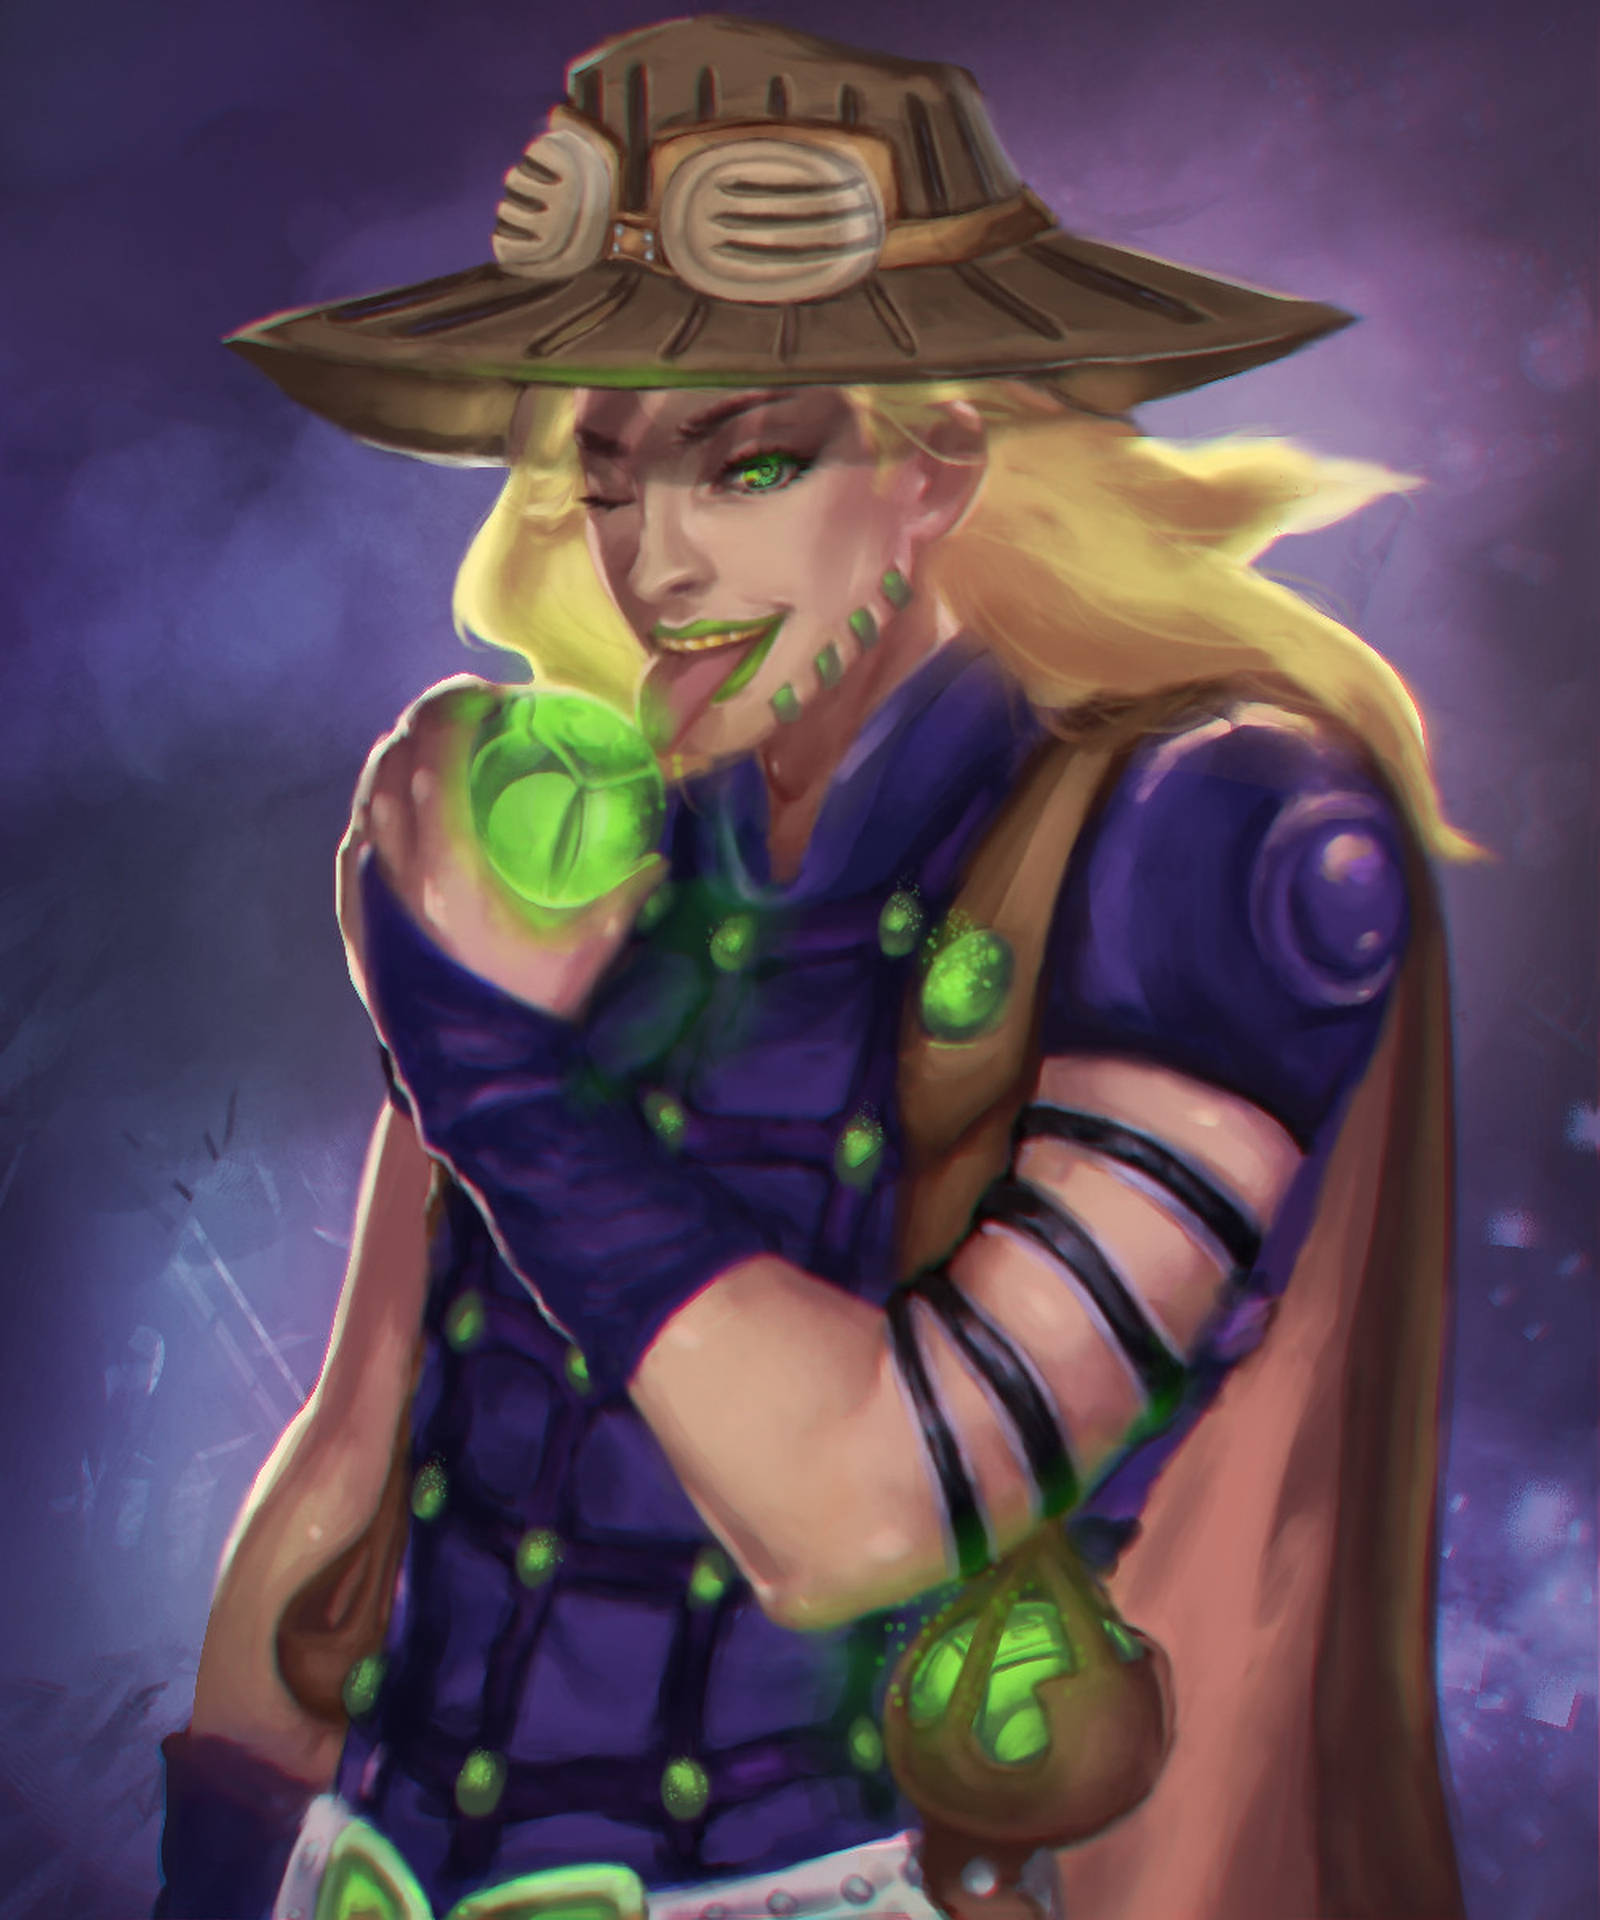 Gyro Zeppeli Sticking Tongue Out Wallpaper